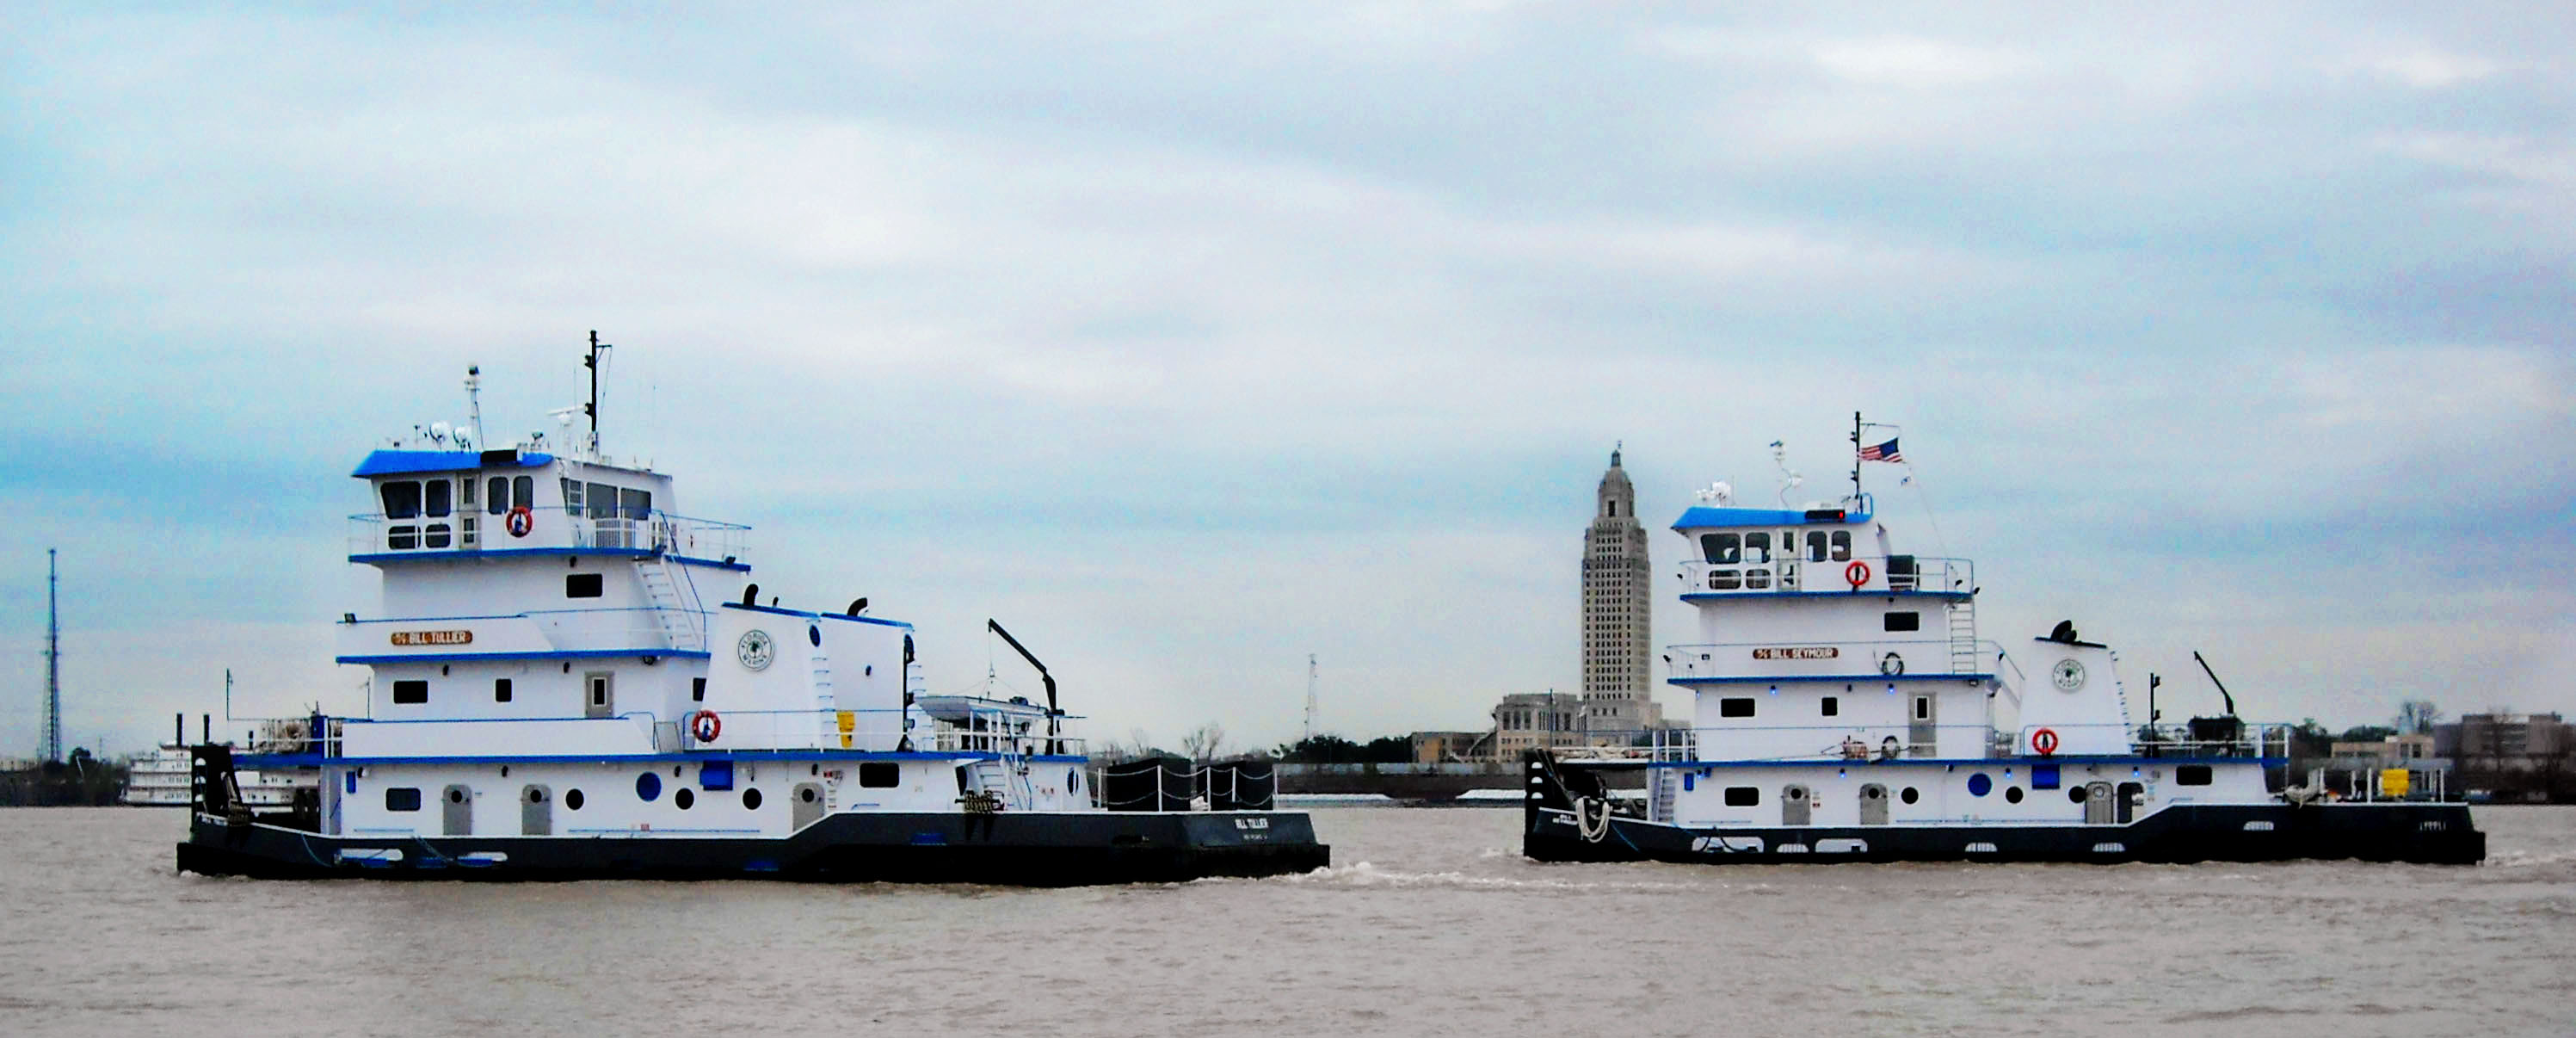 Two Florida Marine Transporters towboats on water